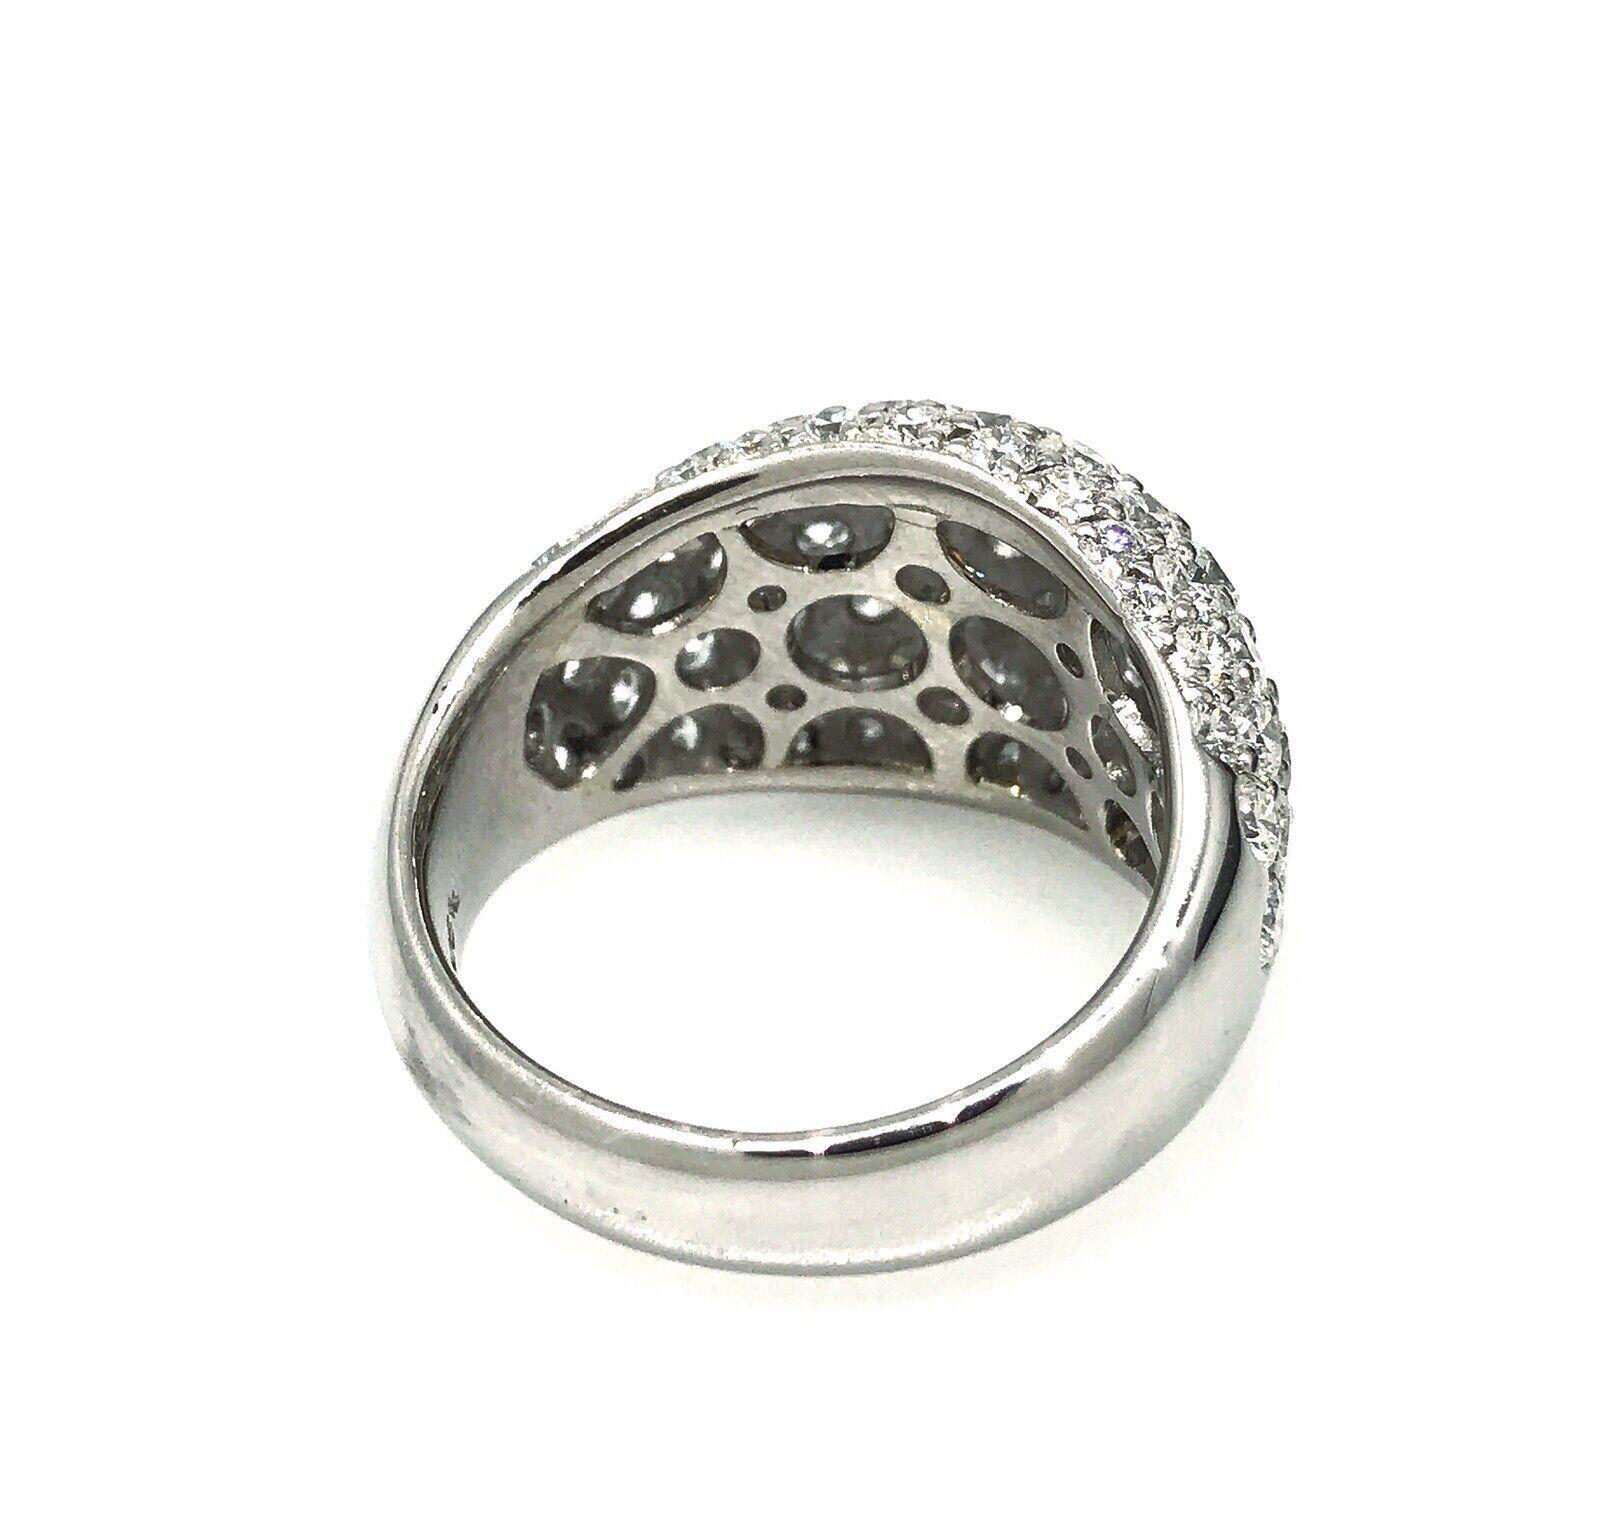 3.86 carat Pave Dome Diamond Cocktail Ring in Platinum In Excellent Condition For Sale In La Jolla, CA